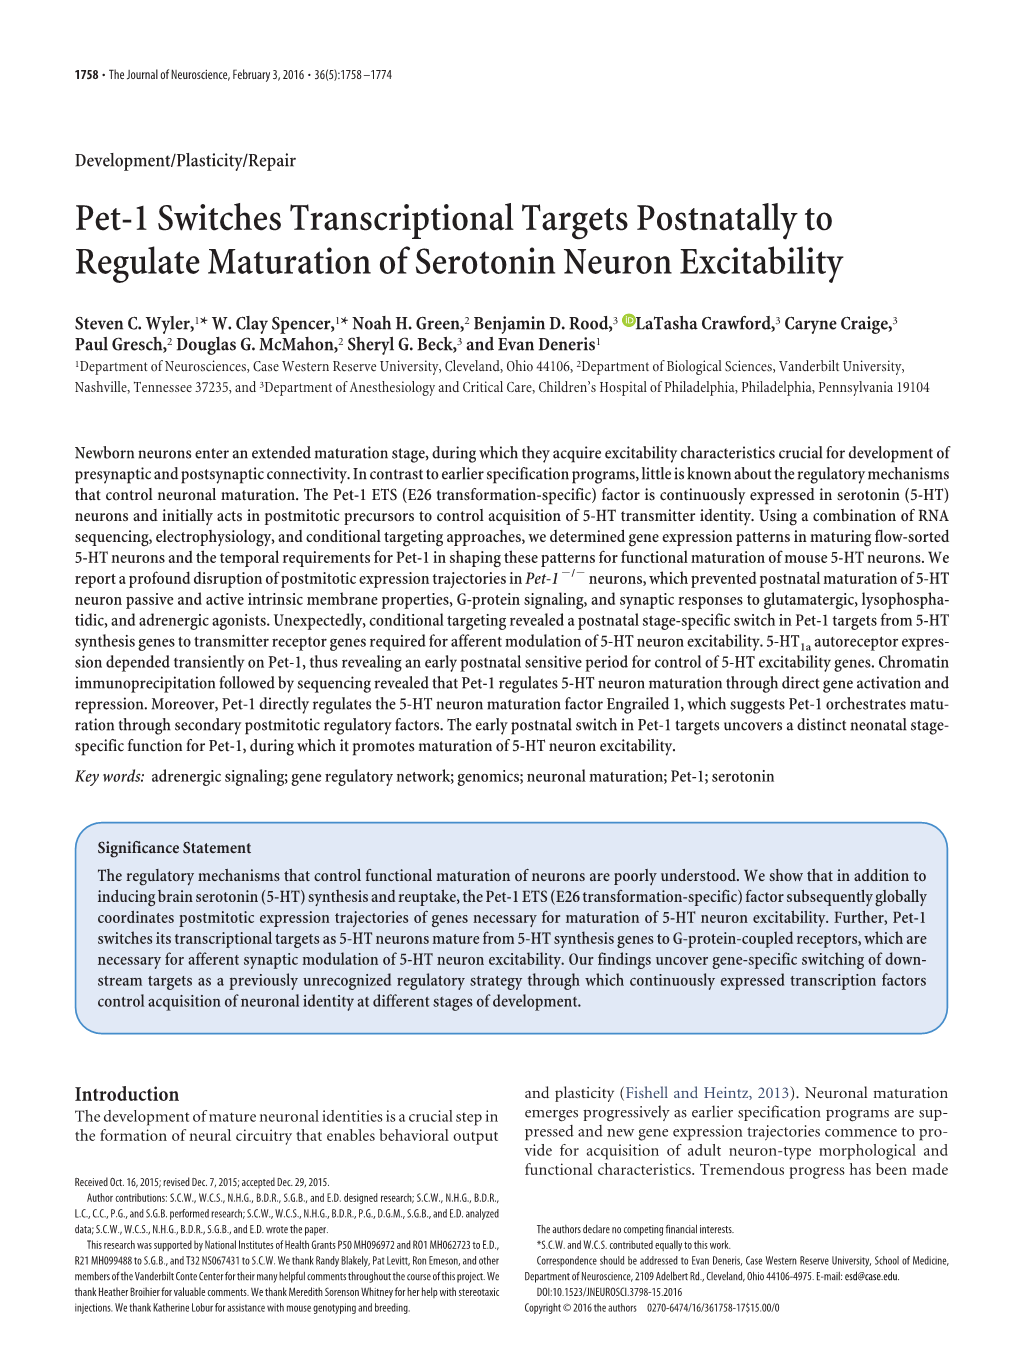 Pet-1 Switches Transcriptional Targets Postnatally to Regulate Maturation of Serotonin Neuron Excitability